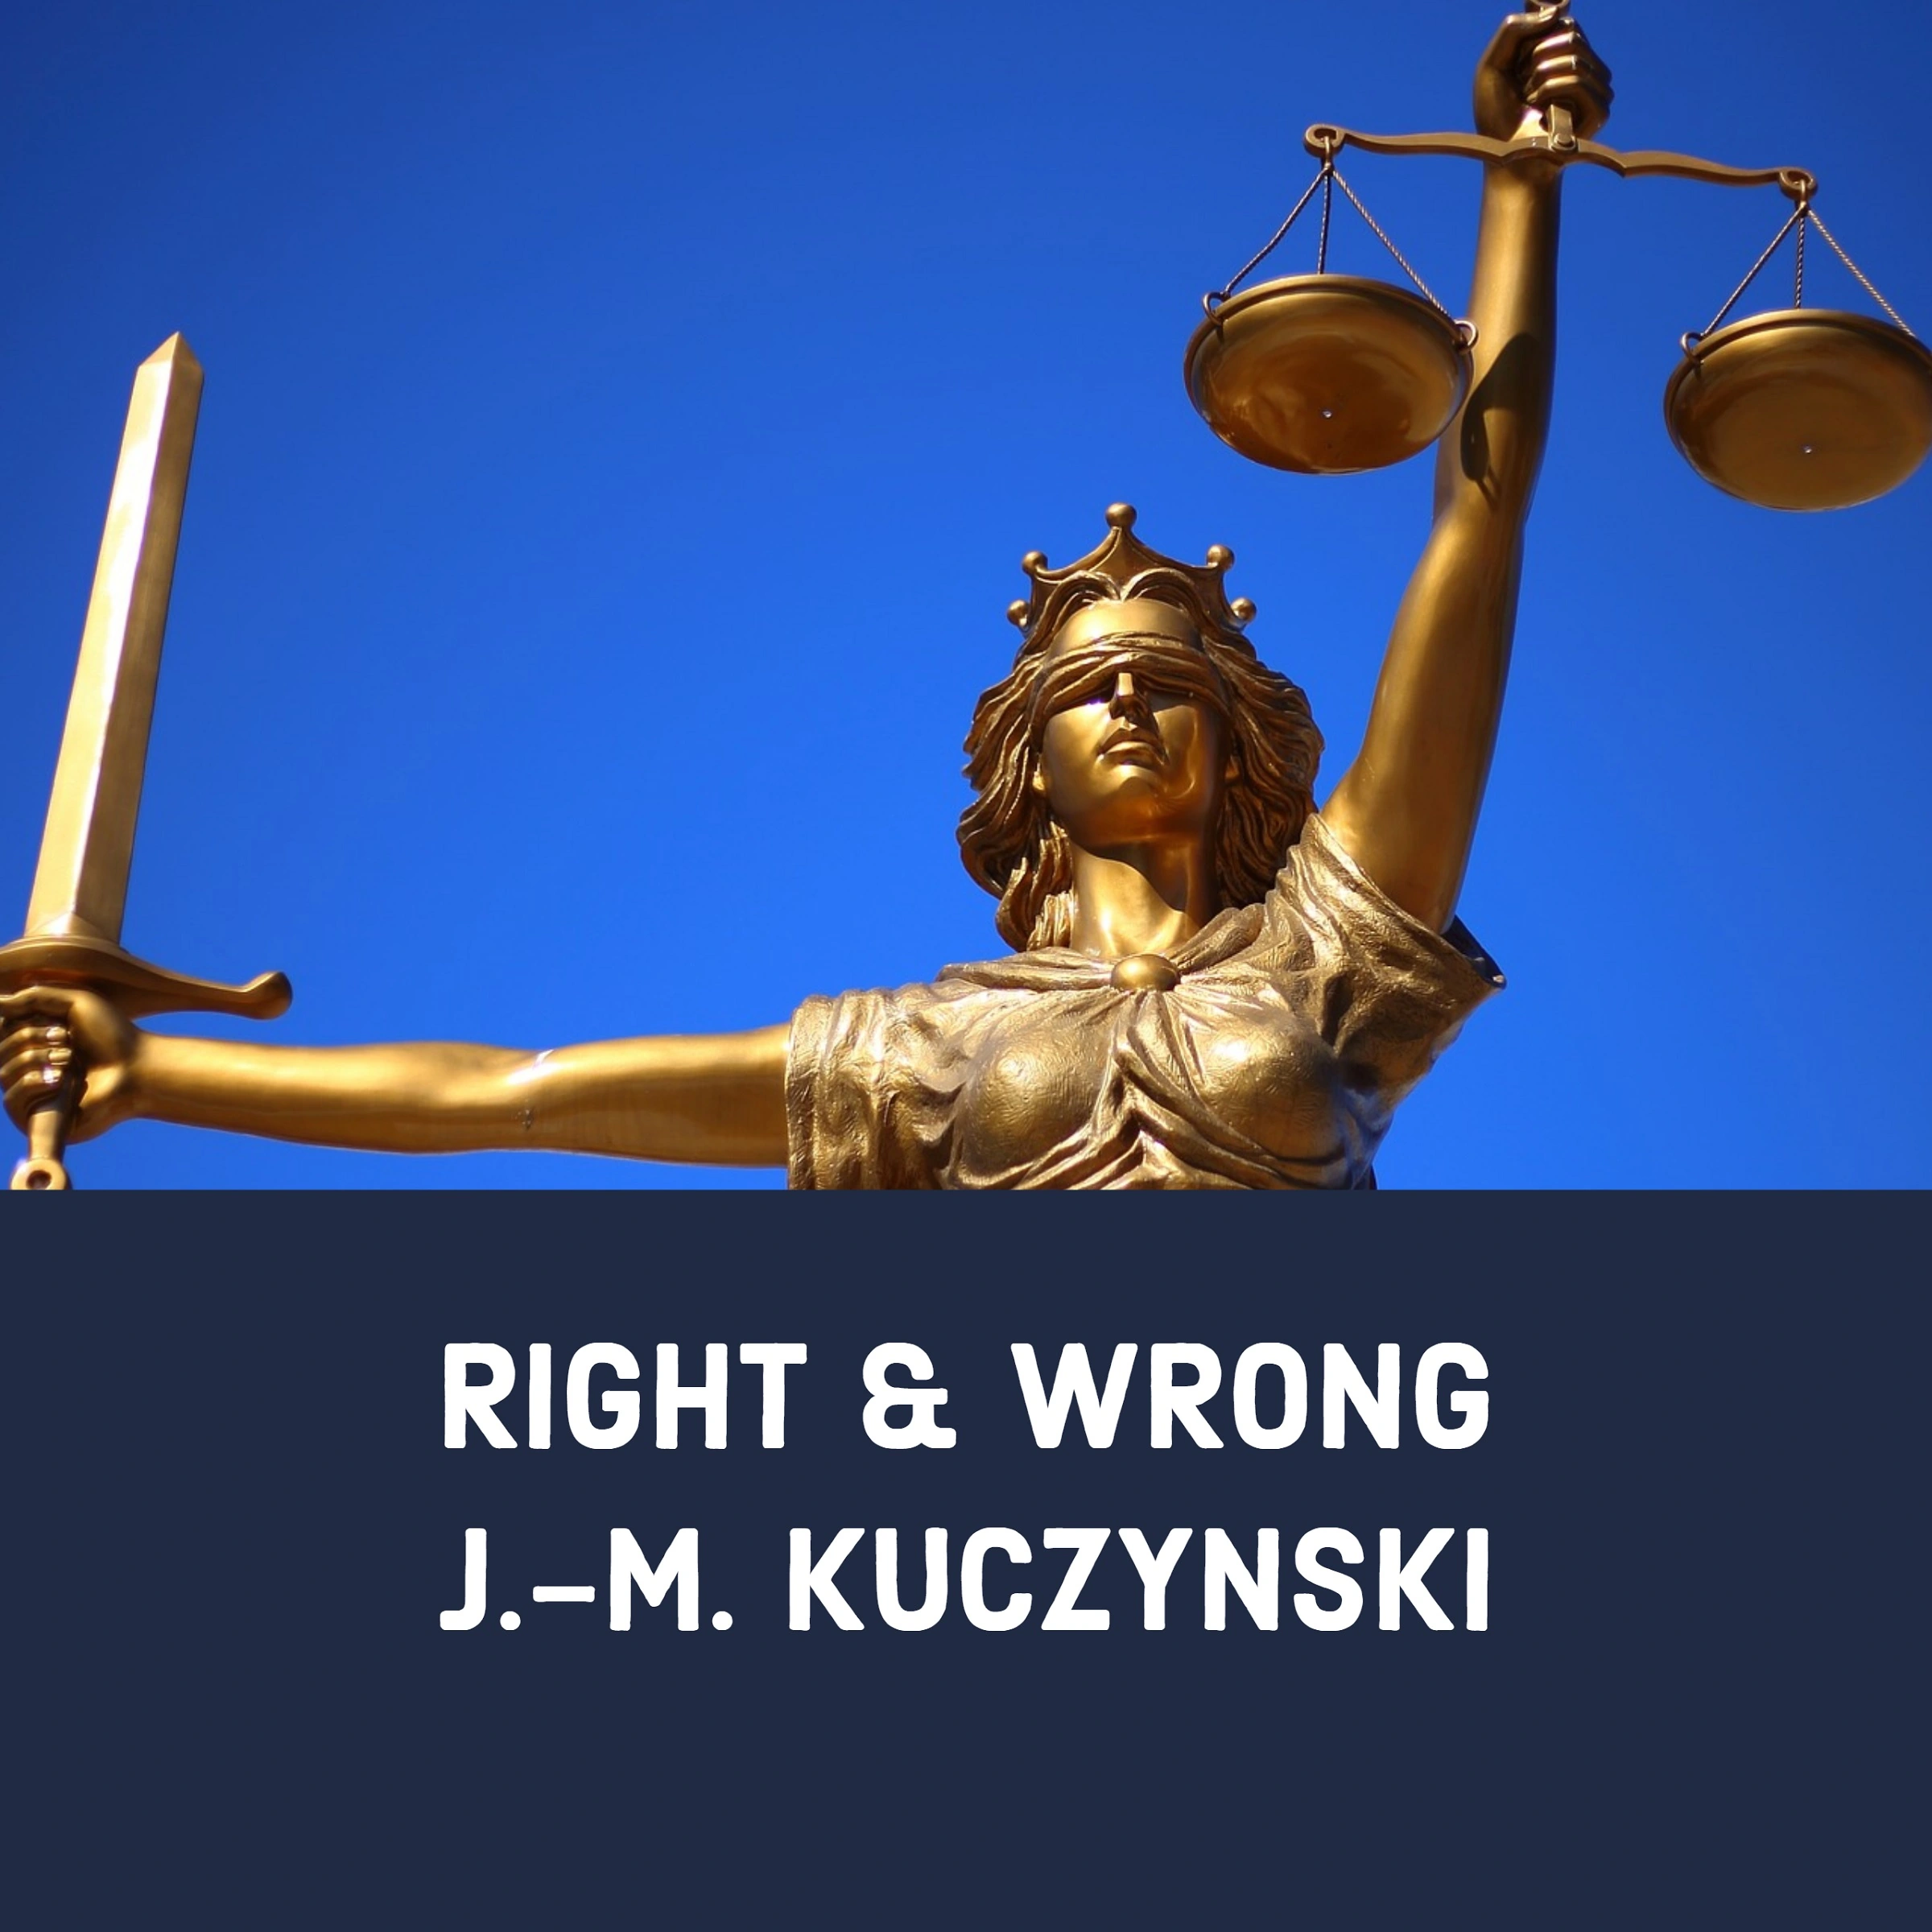 Right and Wrong Audiobook by J.-M. Kuczynski